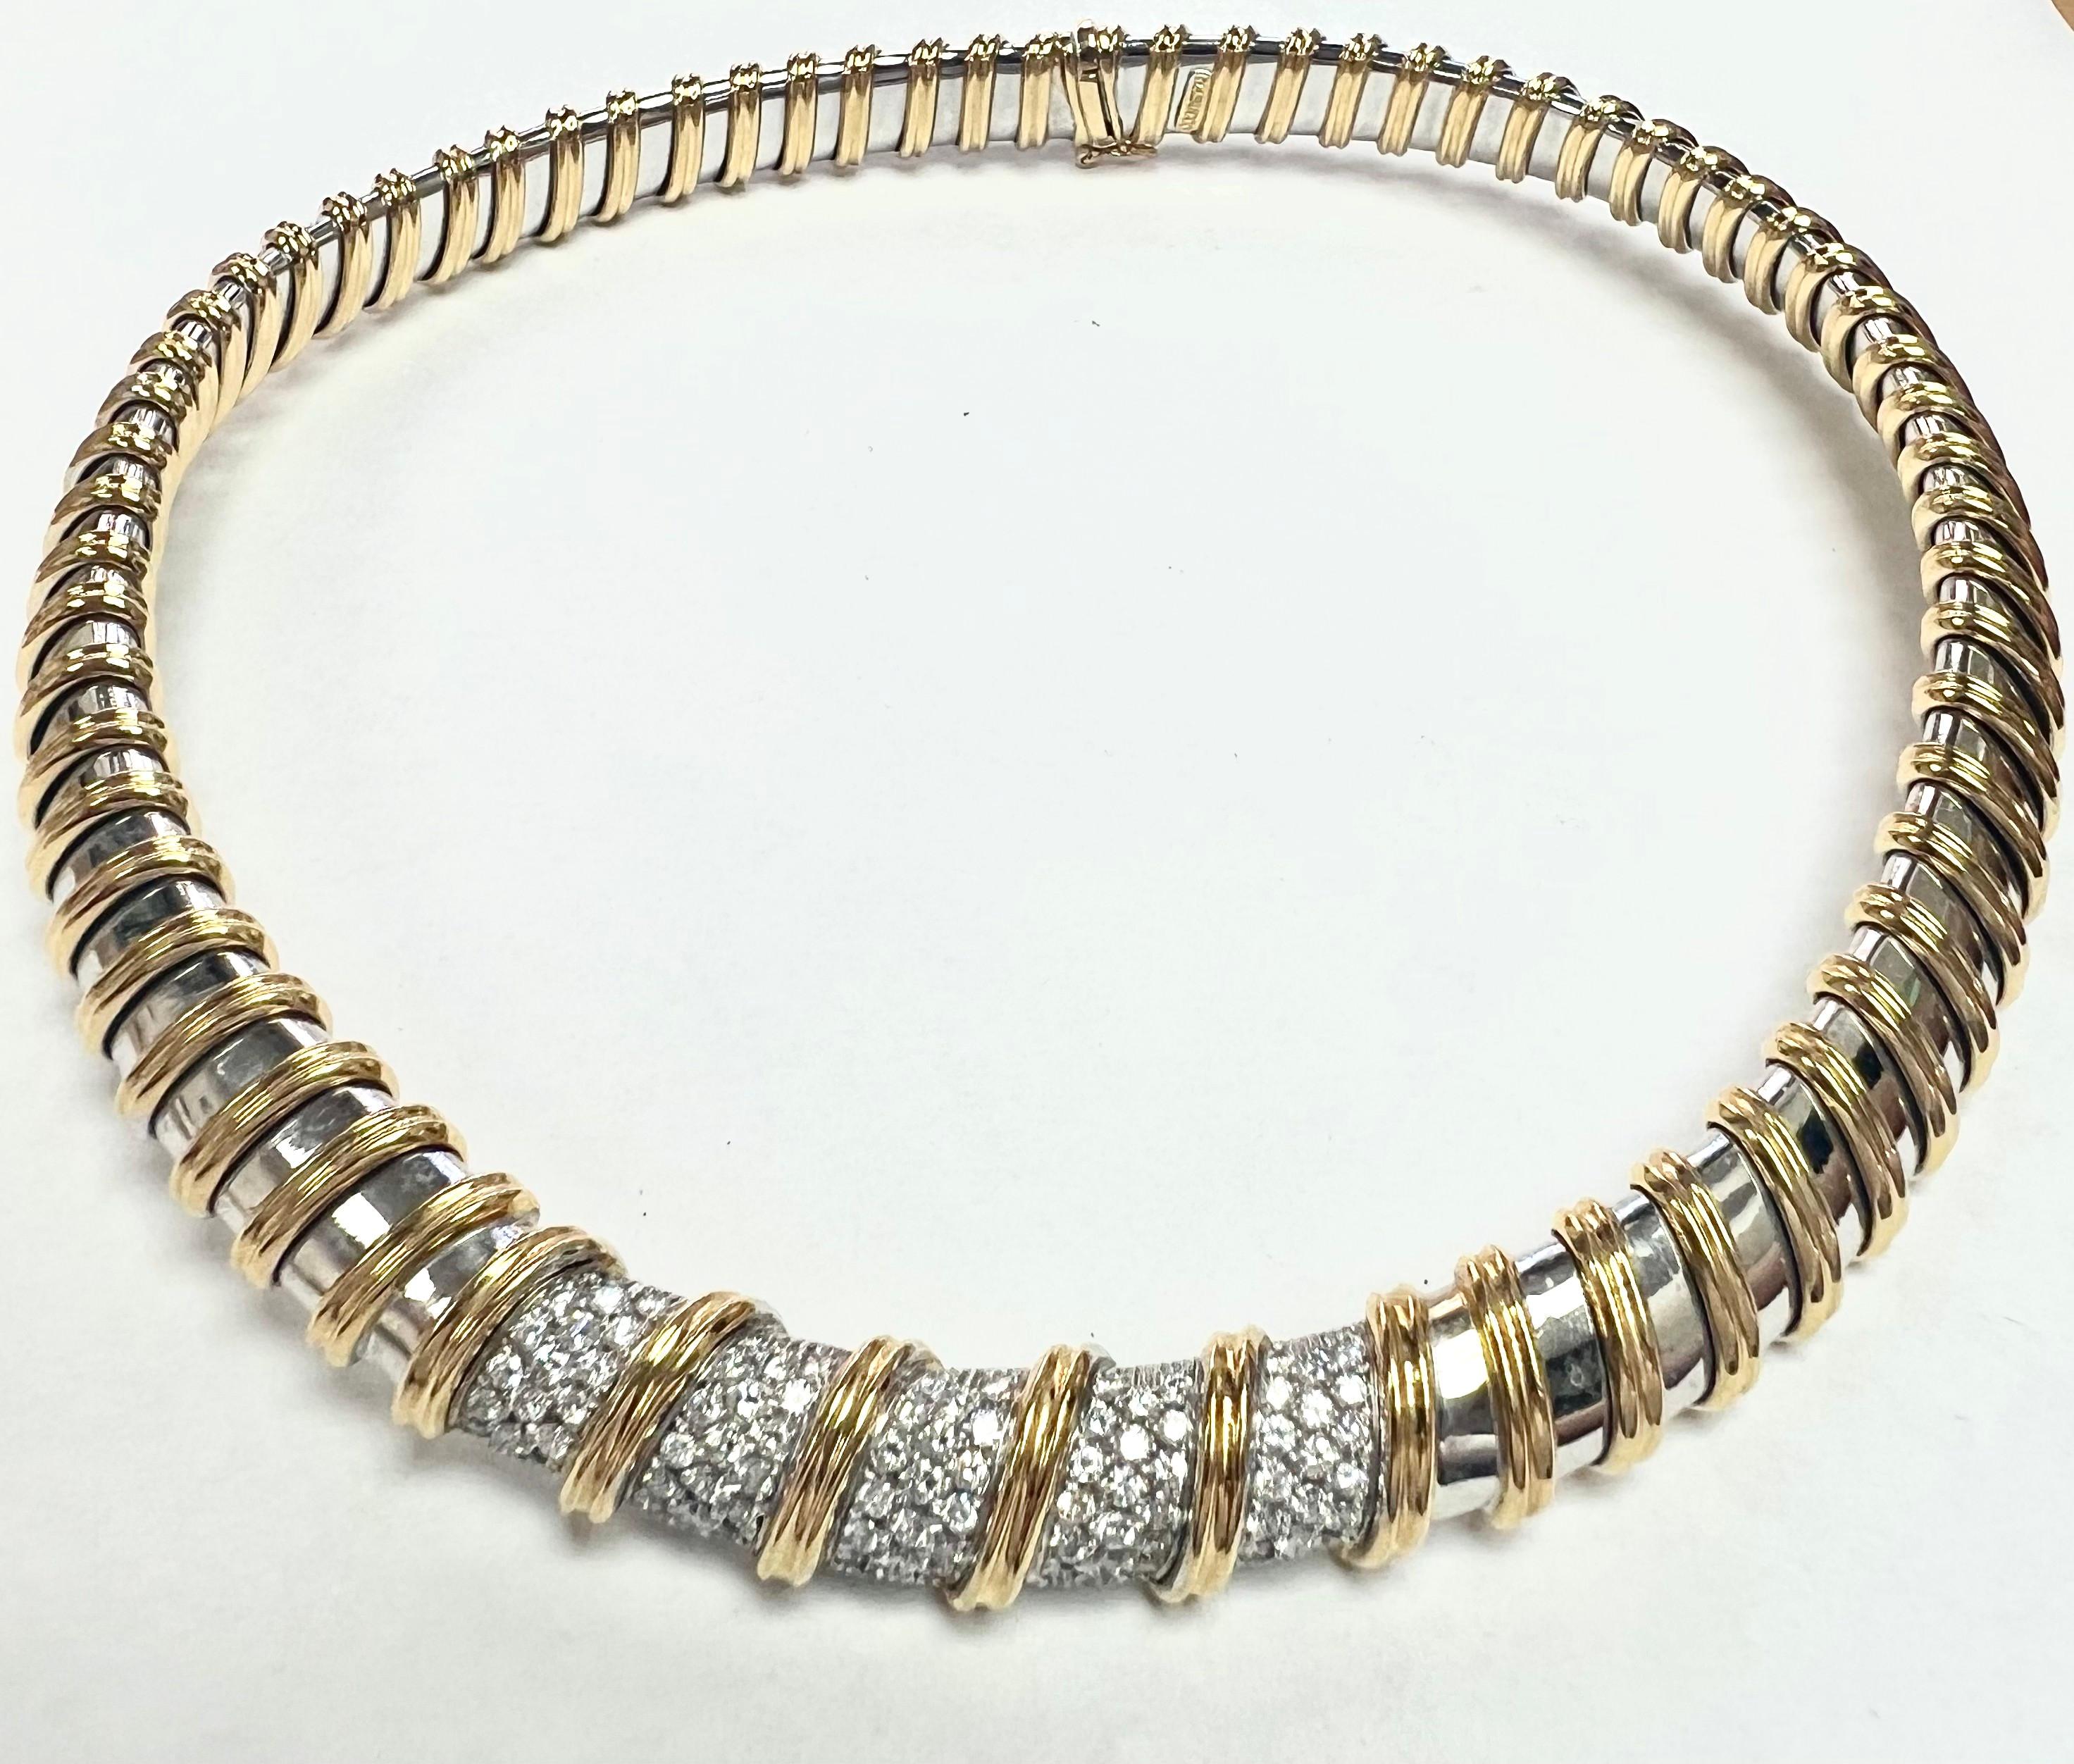 Showcasing a simply beautiful, elegant, and finely detailed two tone necklace, it features 5 beautifully set rows of natural white round diamonds, approx. 3.04 total carat weight. The necklace is hand crafted in 18k yellow & white gold. Ideally